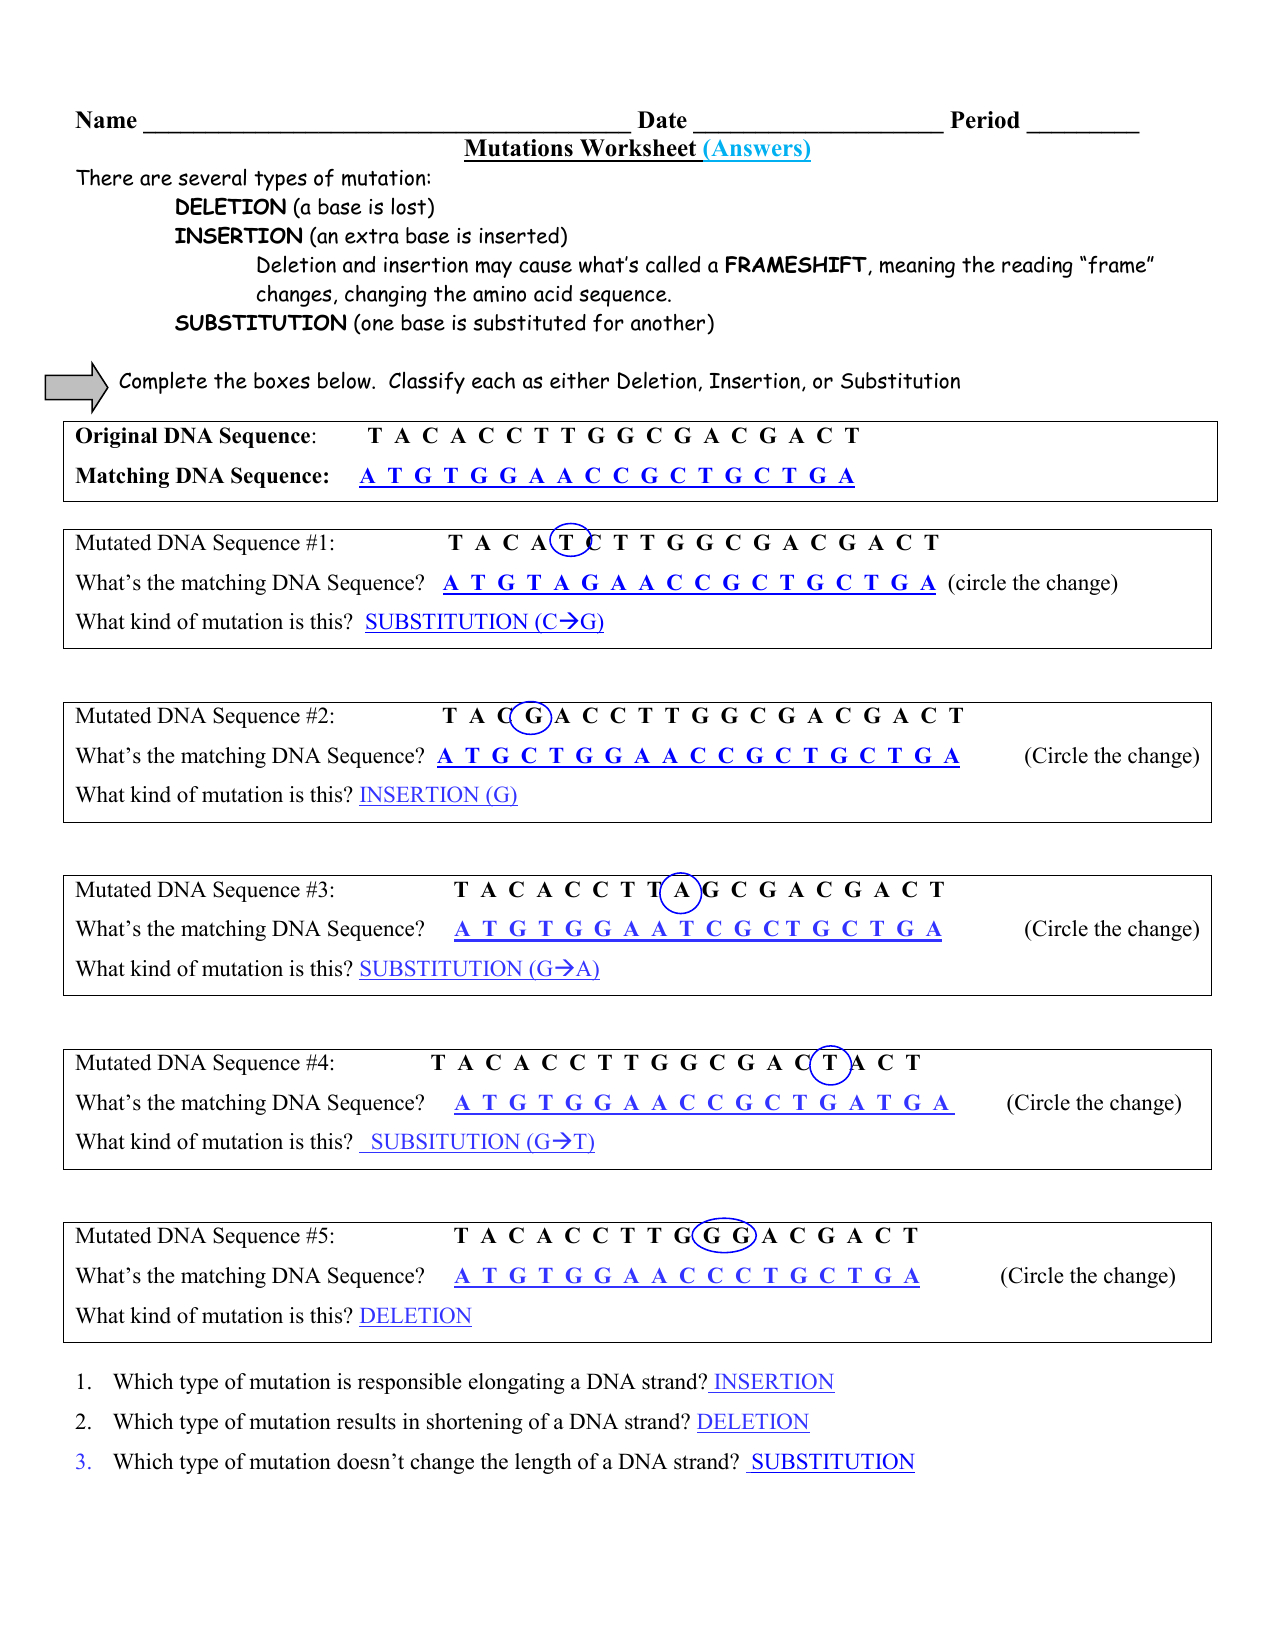 Mutation Answers  Guertinscience For Mutations Worksheet Deletion Insertion And Substitution